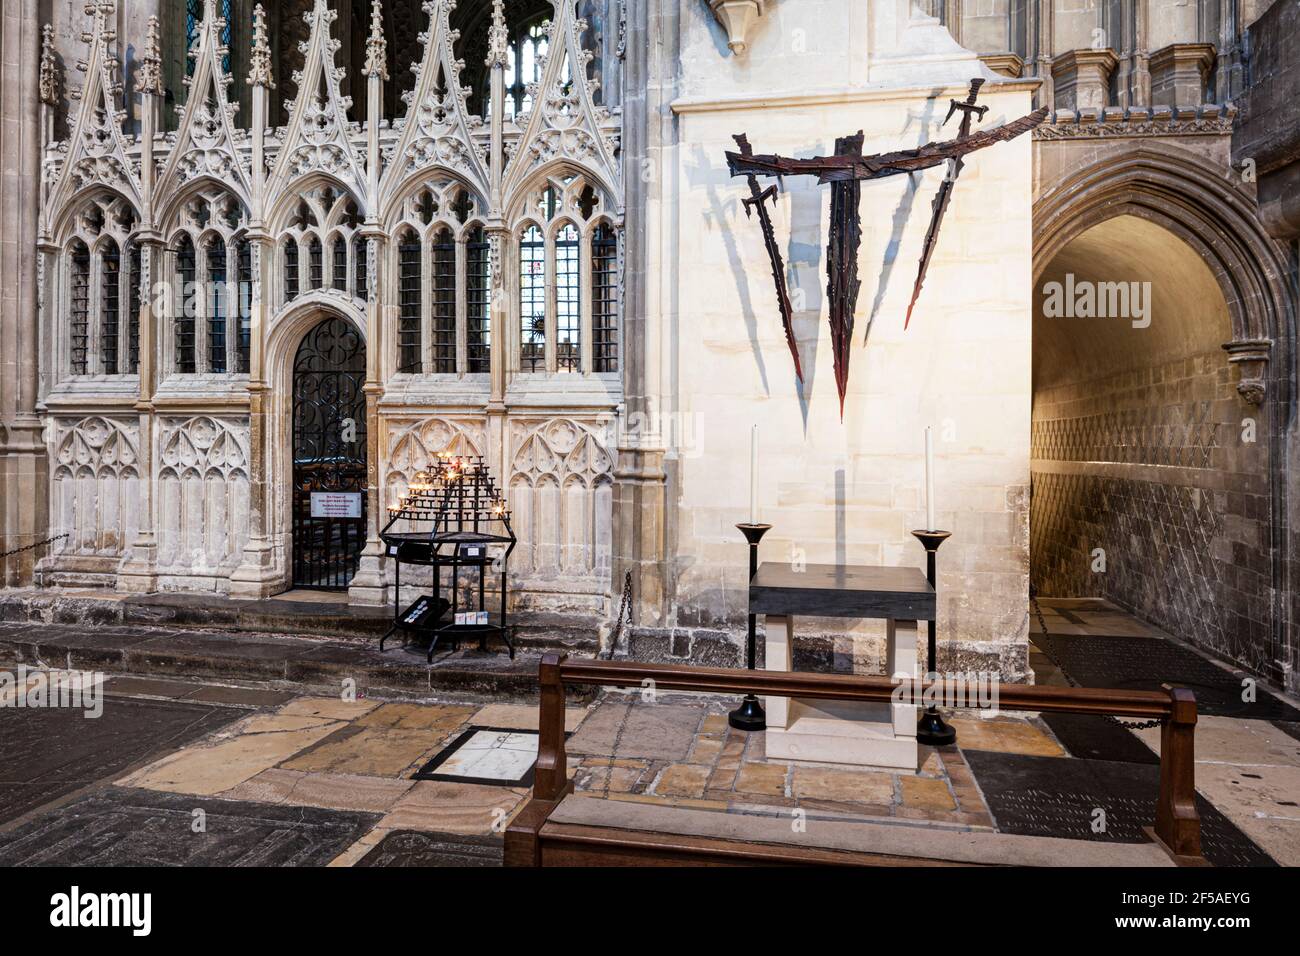 The Martyrdom in Canterbury Cathedral, Kent UK marking the spot where St Thomas Becket was murdered in 1170. Stock Photo